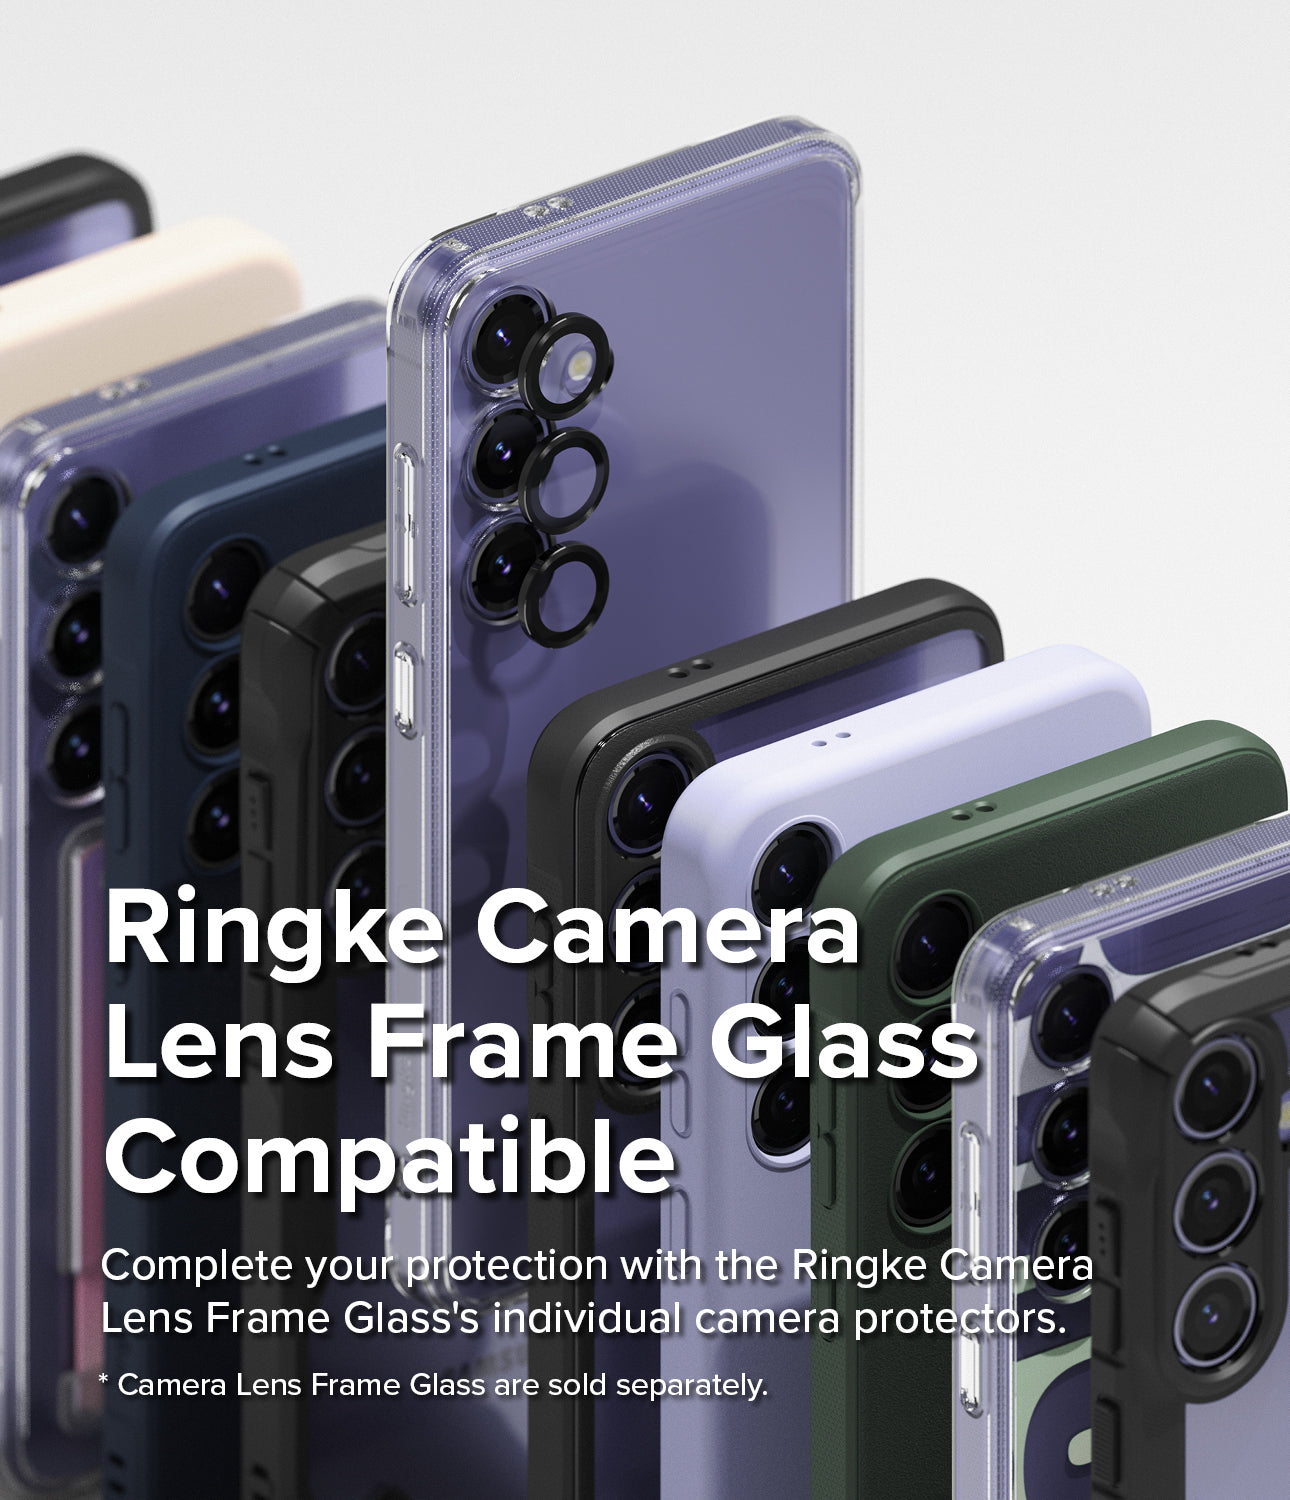 Galaxy S24 Plus Case | Onyx Design - X - Ringke Camera Lens Frame Glass Compatible. Complete your protection with the Ringke Camera Lens Frame Glass' individual camera protectors.